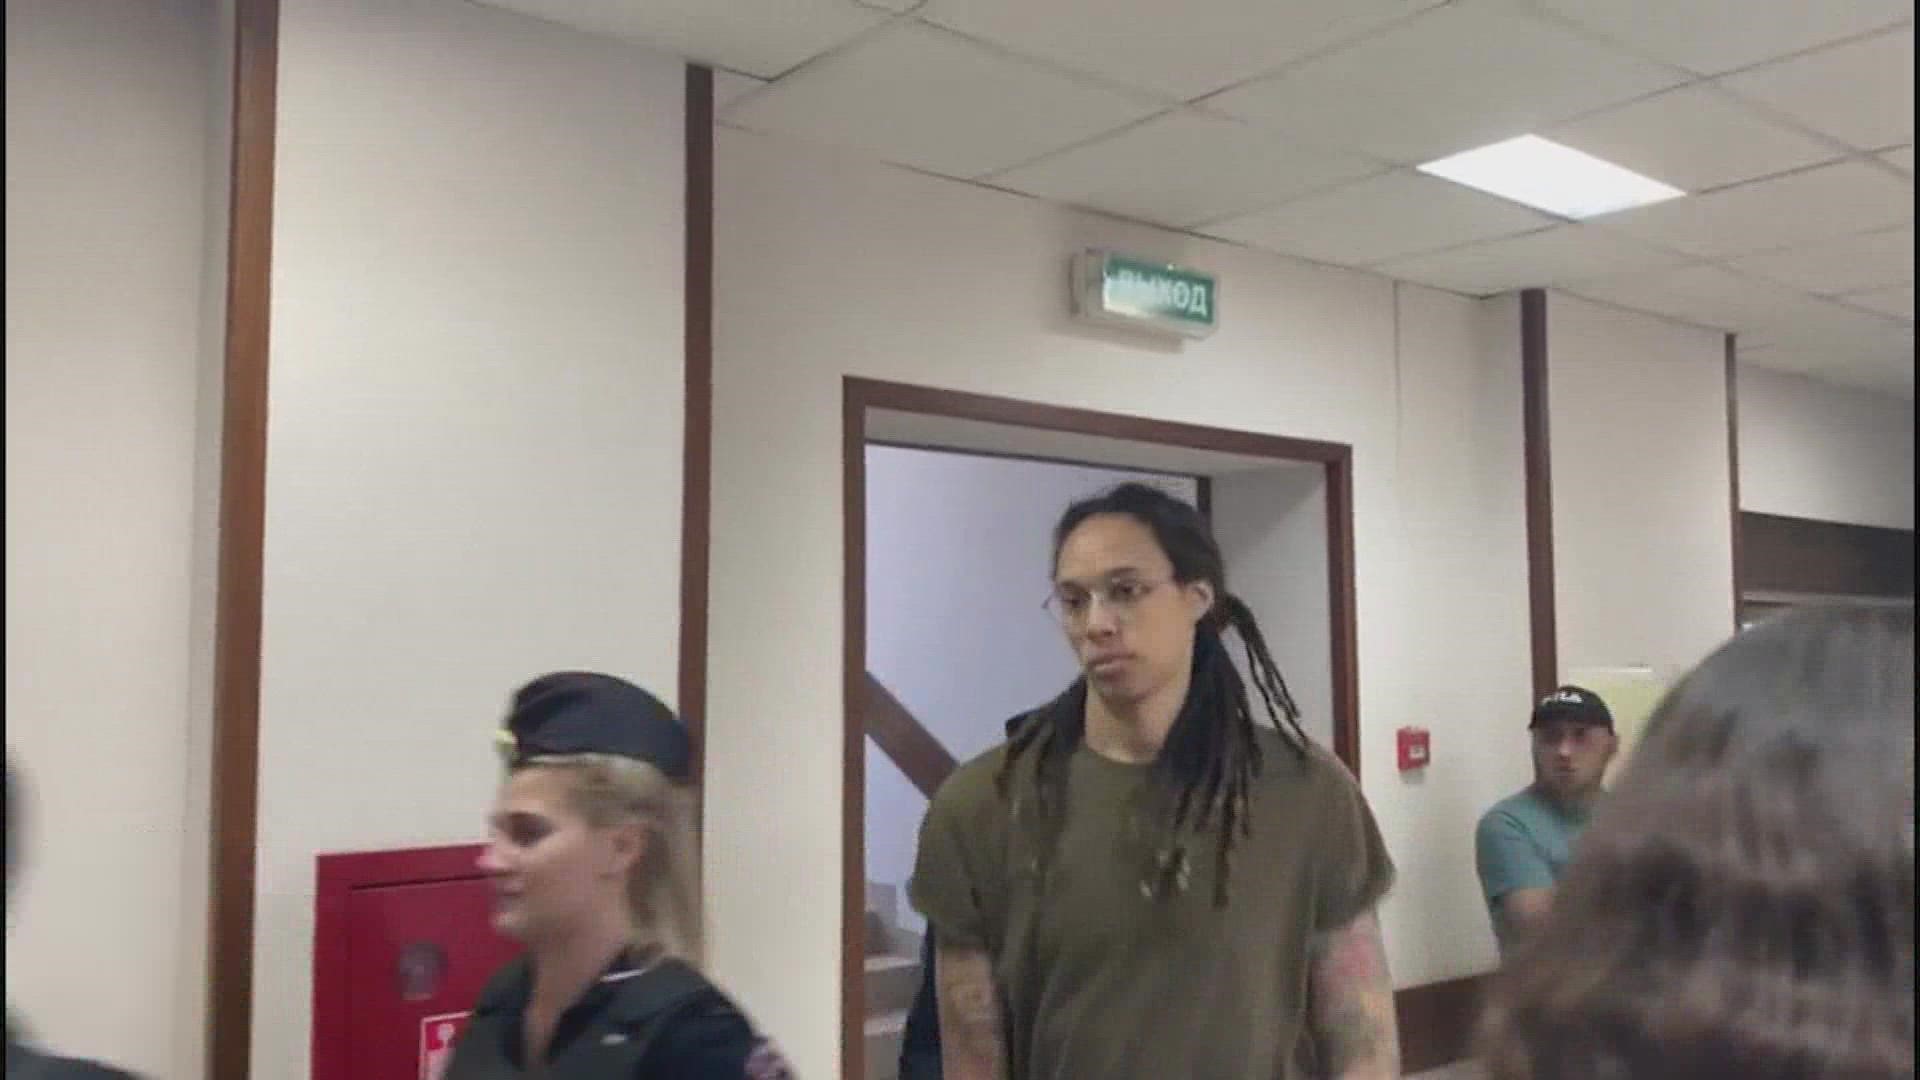 The Houston native pleaded guilty last week but in Russia, that doesn't mean the trial automatically ends. Griner could face up to 10 years in prison.